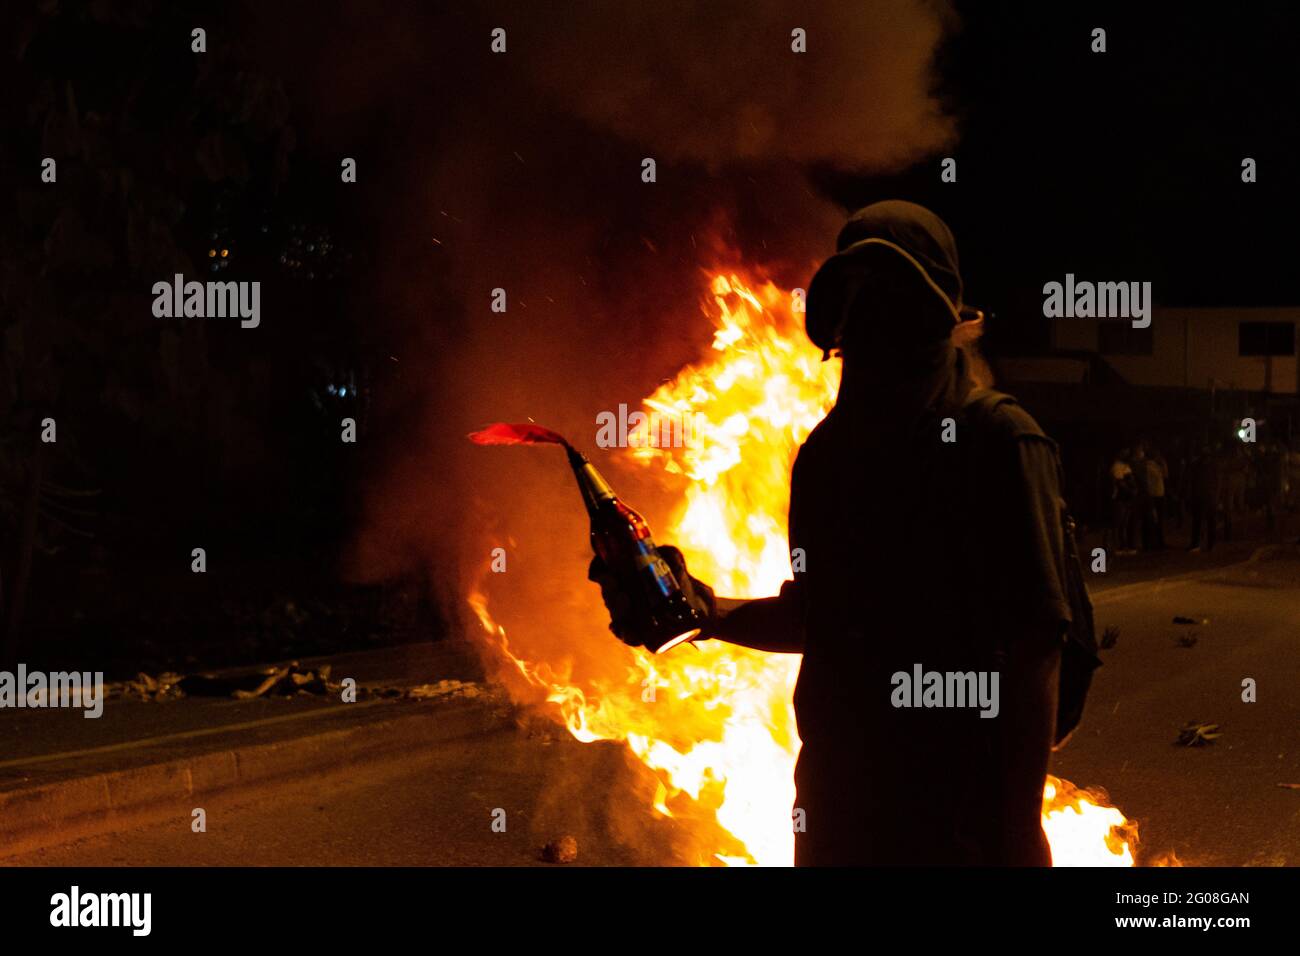 Medellin, Colombia on May 31, 2021. A demonstrator stands in front of a fire with a Molotov bomb as a group of hooded demonstrators clashes with Colombia's riot police (ESMAD) in Medellin, Colombia during the on going anti government protests against Presiden Ivan Duque's tax and health reform and police brutality and unrest that leaves at least 70 dead during the past month, in Medellin, Colombia on May 31, 2021. Stock Photo